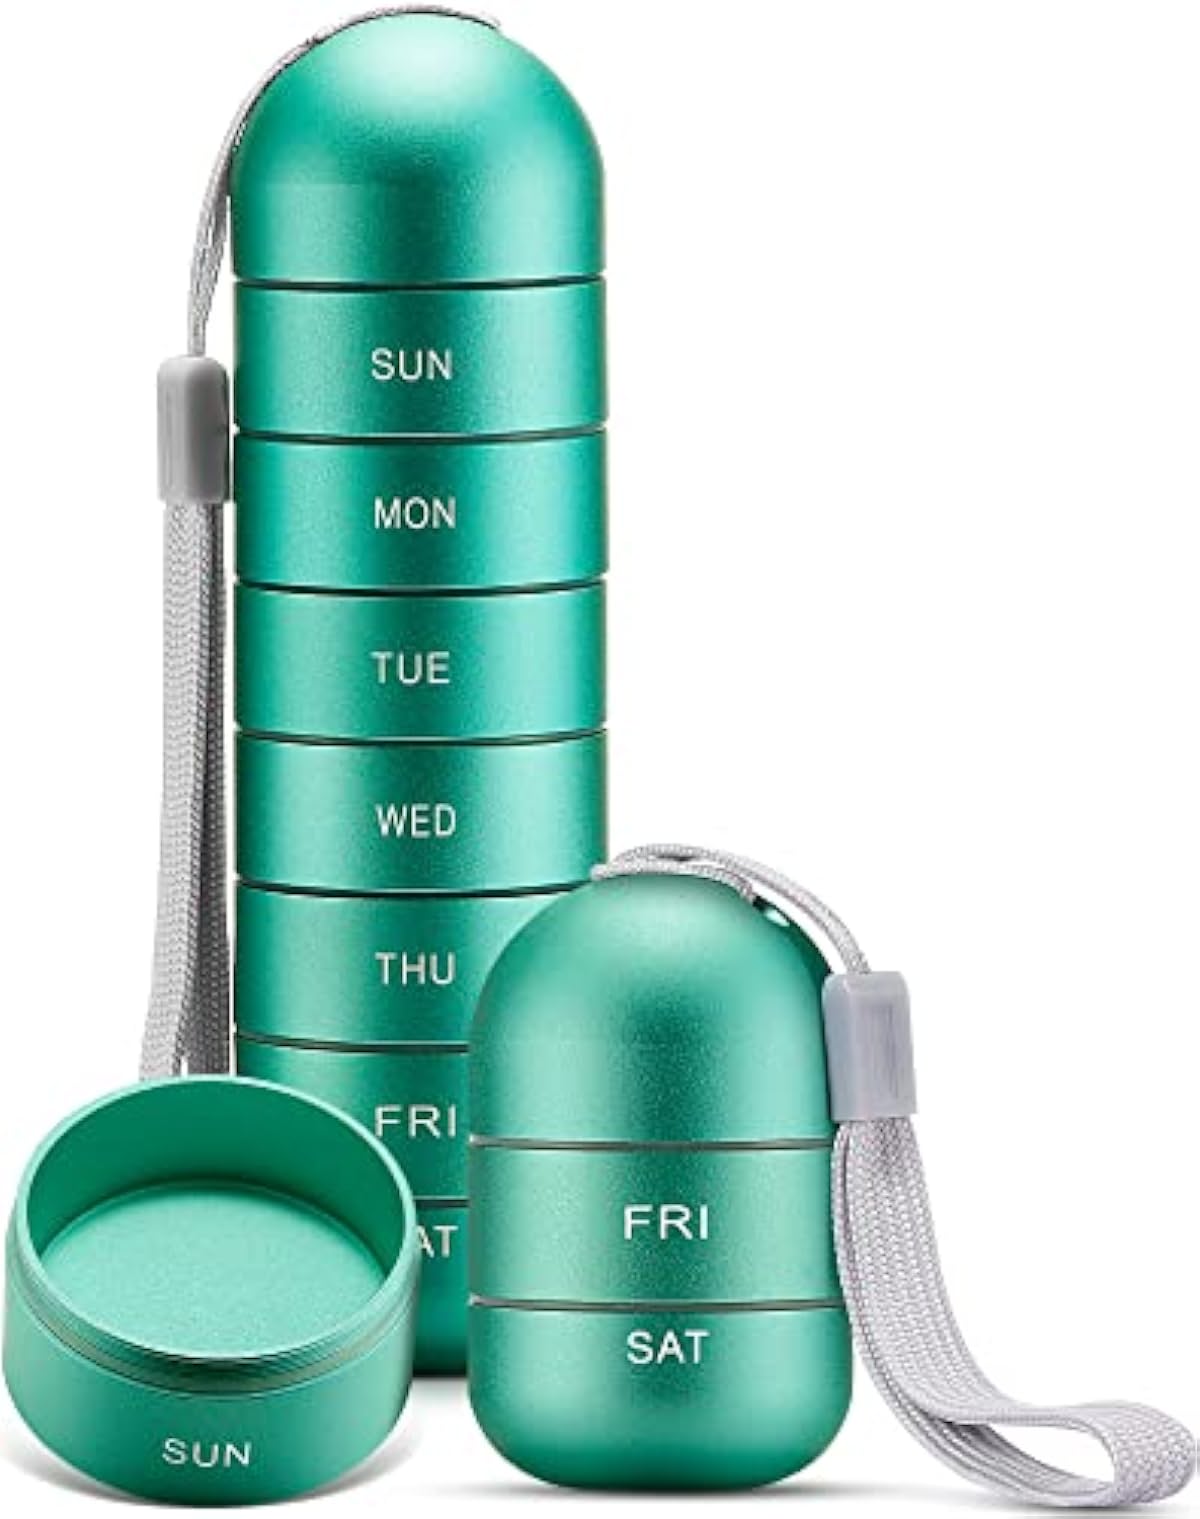 Zannaki Metal Moisture Proof Weekly Pill Organizer, Stackable Aluminum Alloy BPA Free Travel Hiking 7 Day Pill Box Case Waterproof and Large Compartment to Hold Pills, Vitamins, Fish Oil, Supplements